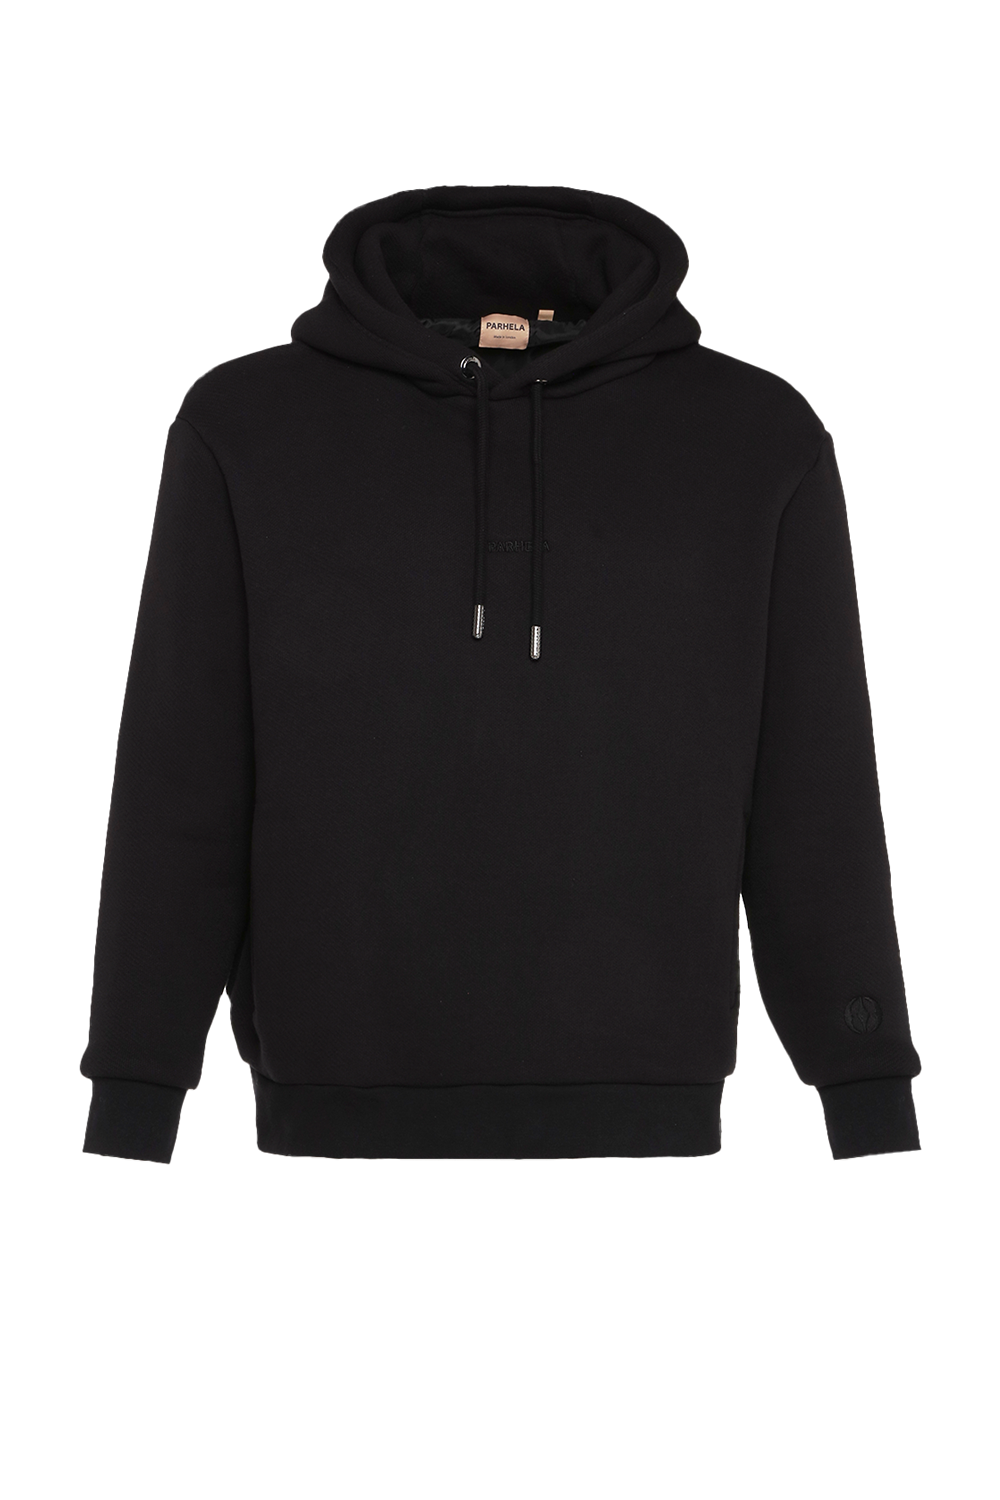 The Lined Hoodie